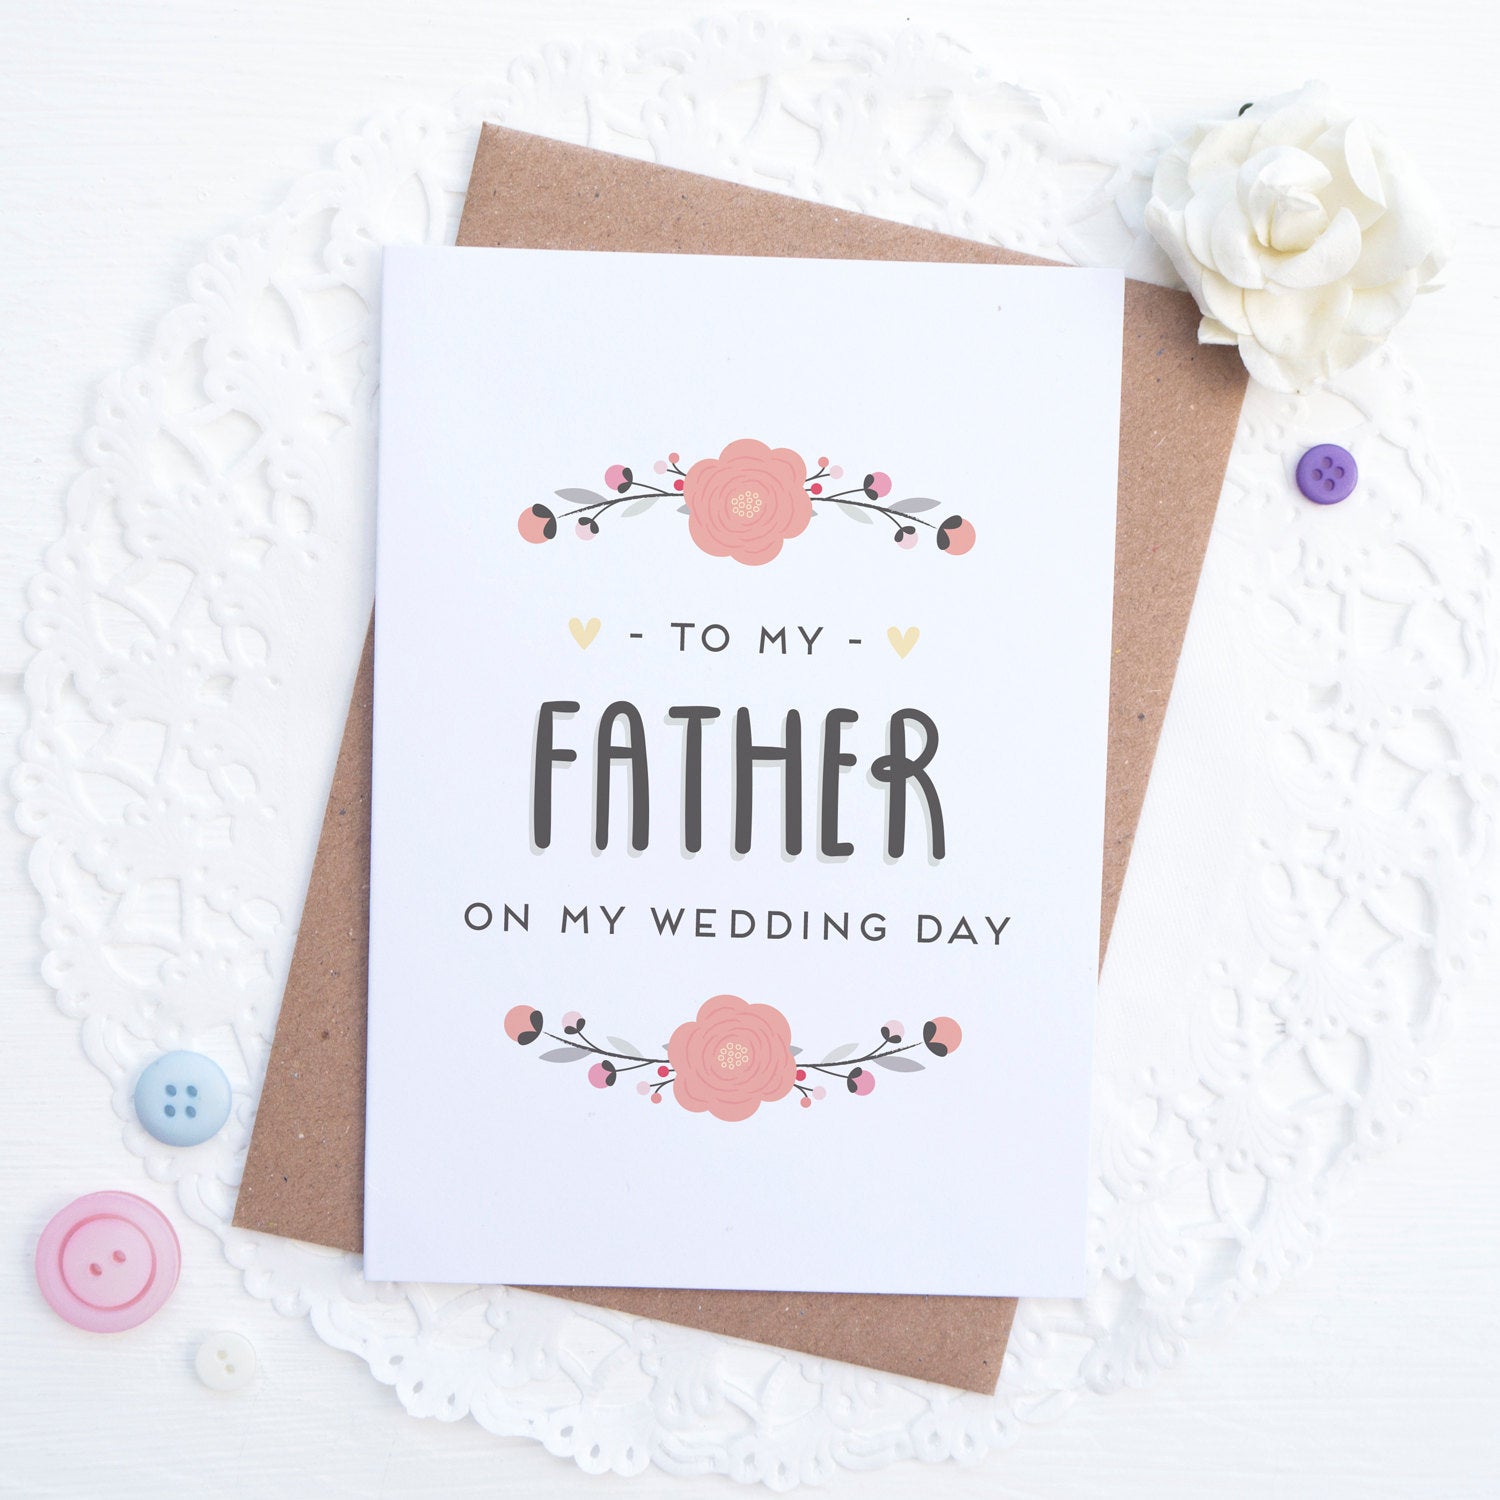 To my father on my wedding day card in pink